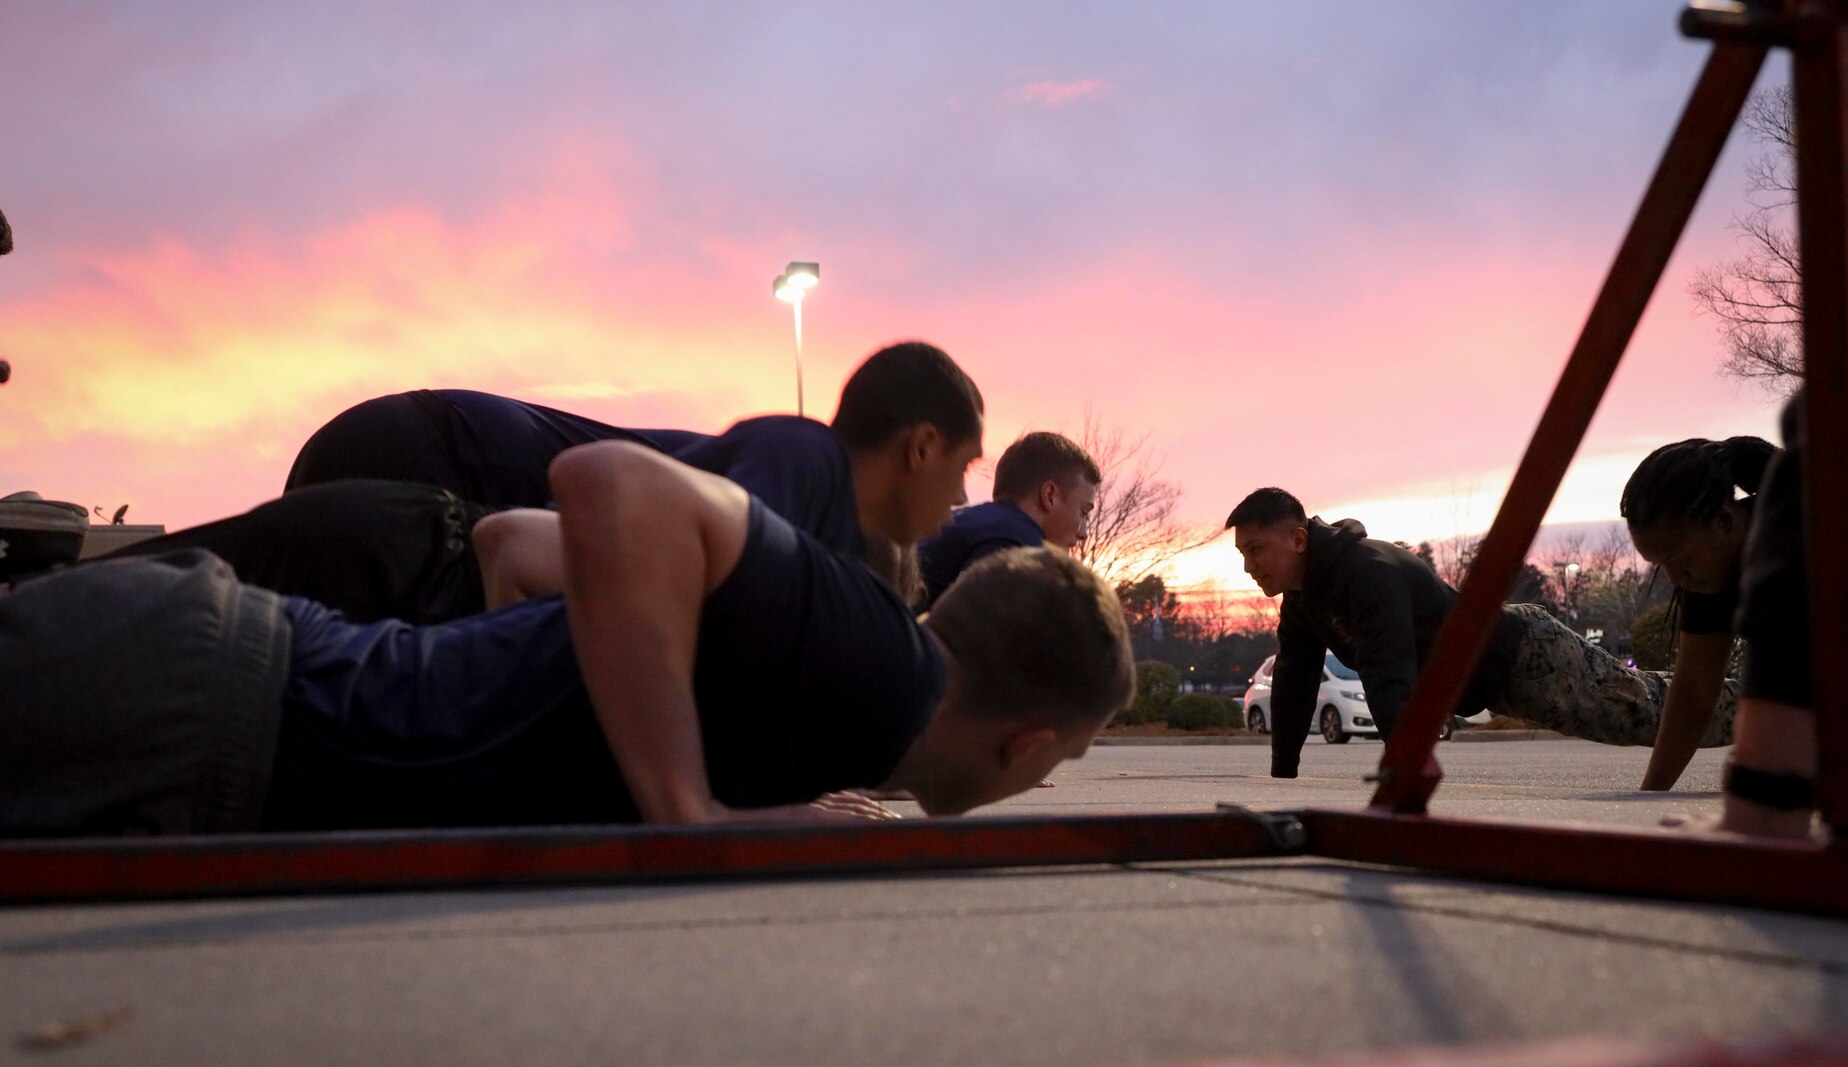 U.S. Marines and poolees with Recruiting Sub Station Lexington, Recruiting Station Columbia, conduct group push-ups during their aweekly physical training session in Lexington, South Carolina, Jan. 13, 2022. Recruiters train their poolees arduously in order to ensure they are physically prepared for Marine Corps recruit training. (U.S. Marine Corps photo by Cpl. Dylan Walters)